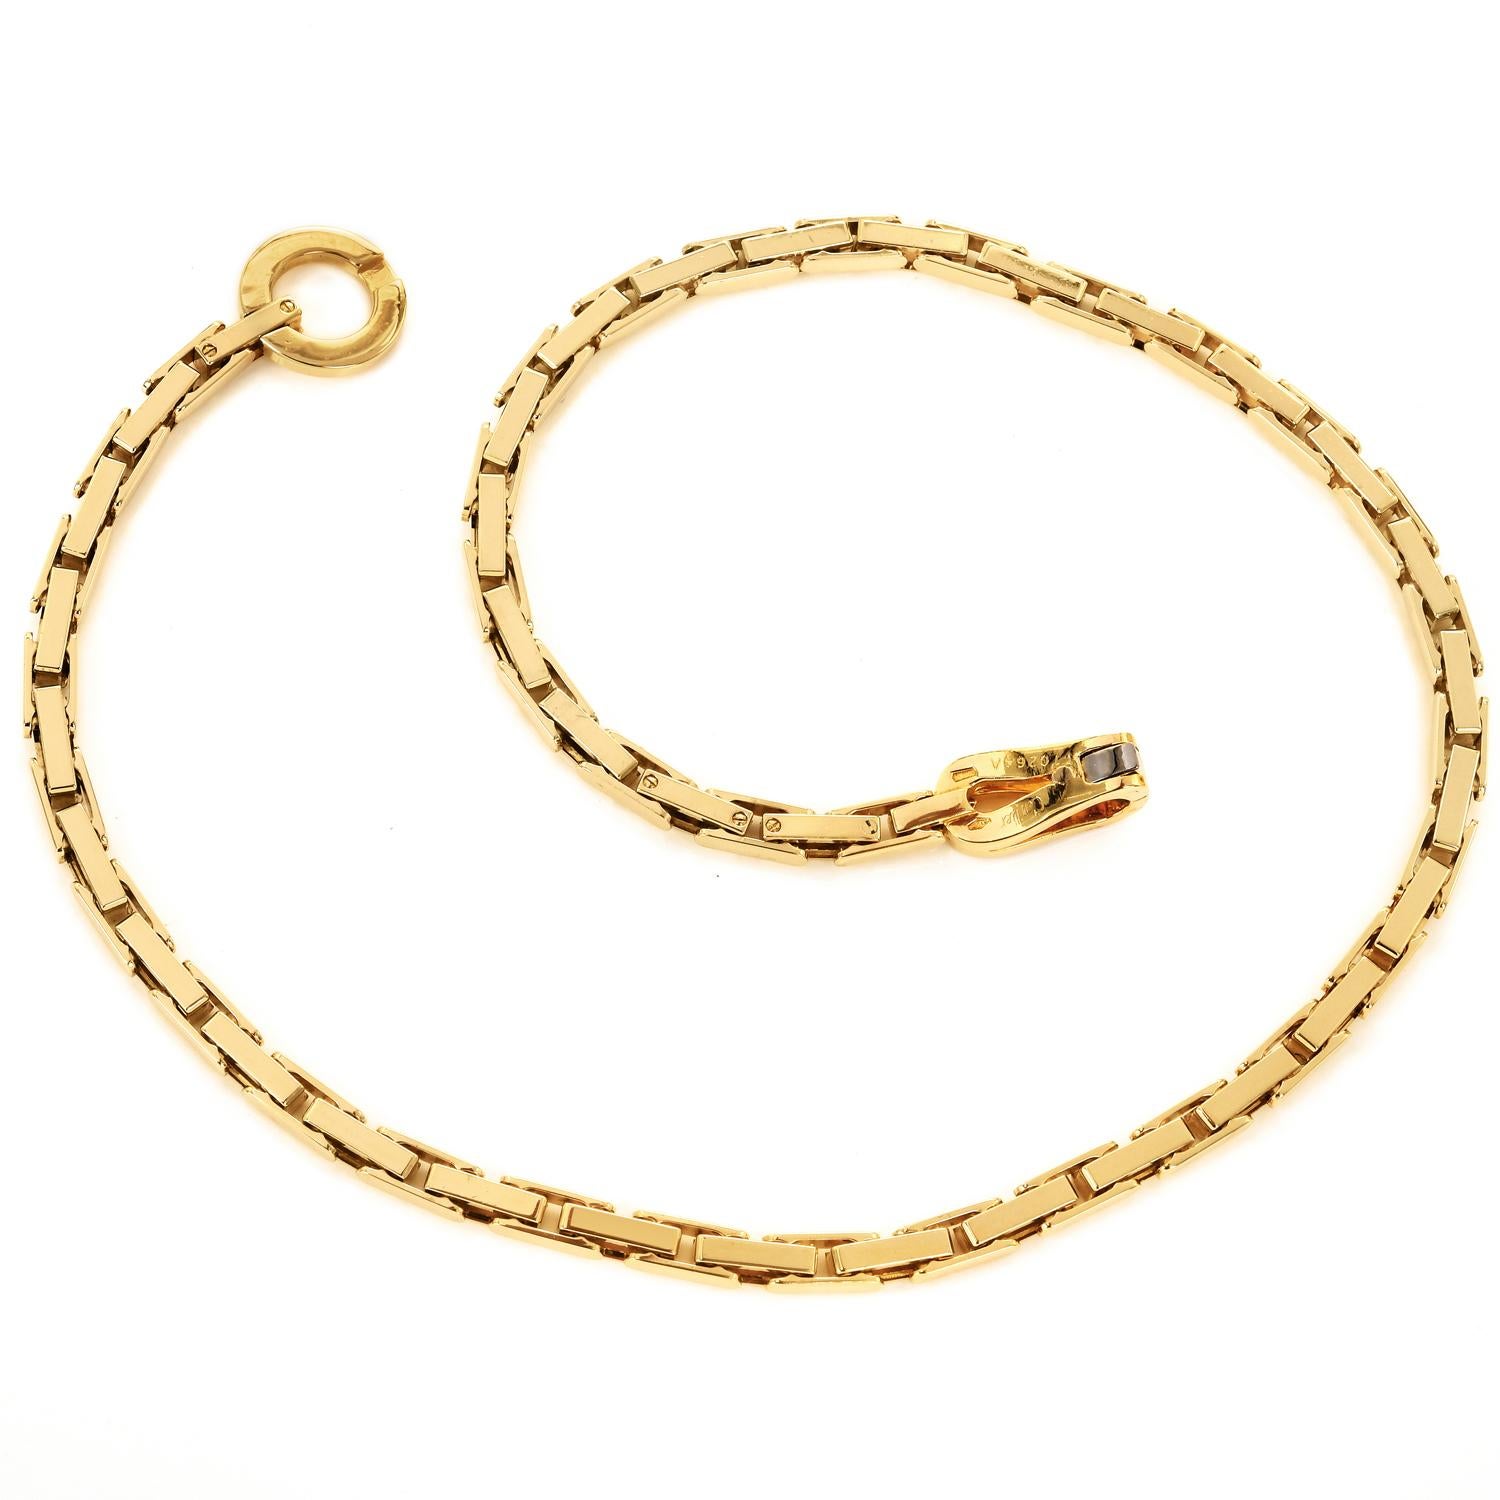 Women's Vintage Cartier Agrafe 18k Yellow Gold Link Chain Necklace